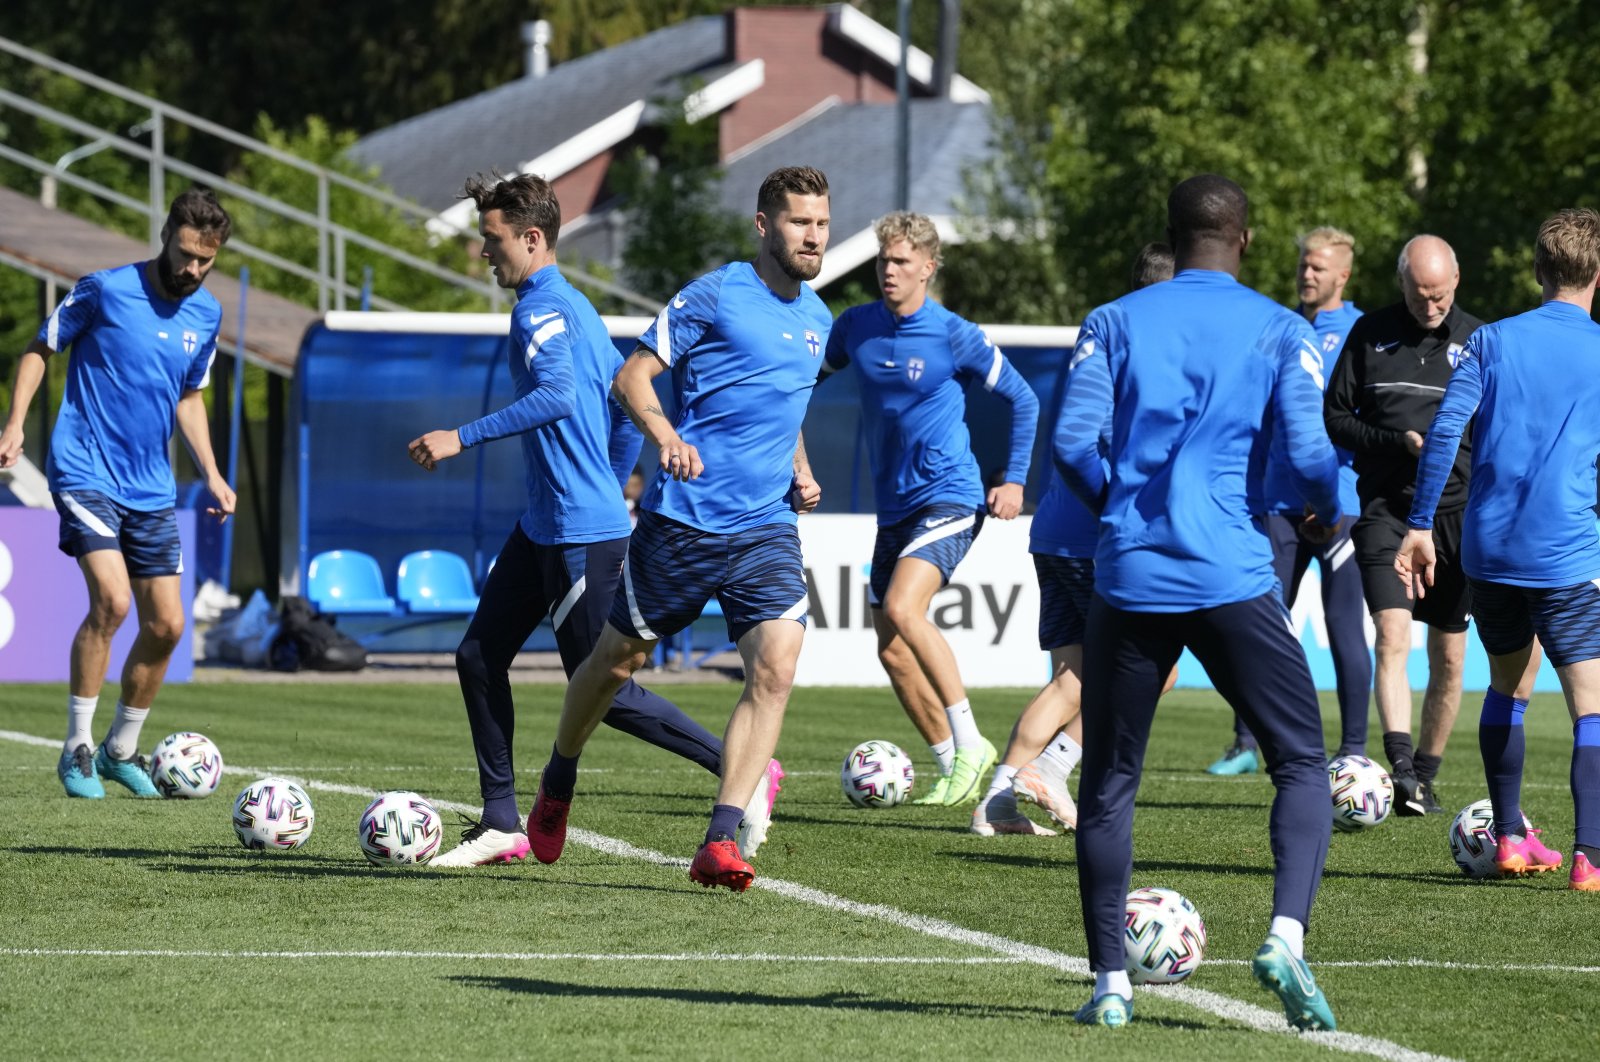 Finland players attend a training session on the eve of the Euro 2020 Group B match against Russia in Zelenogorsk outside St. Petersburg, Russia, June 15, 2021. (AP Photo)